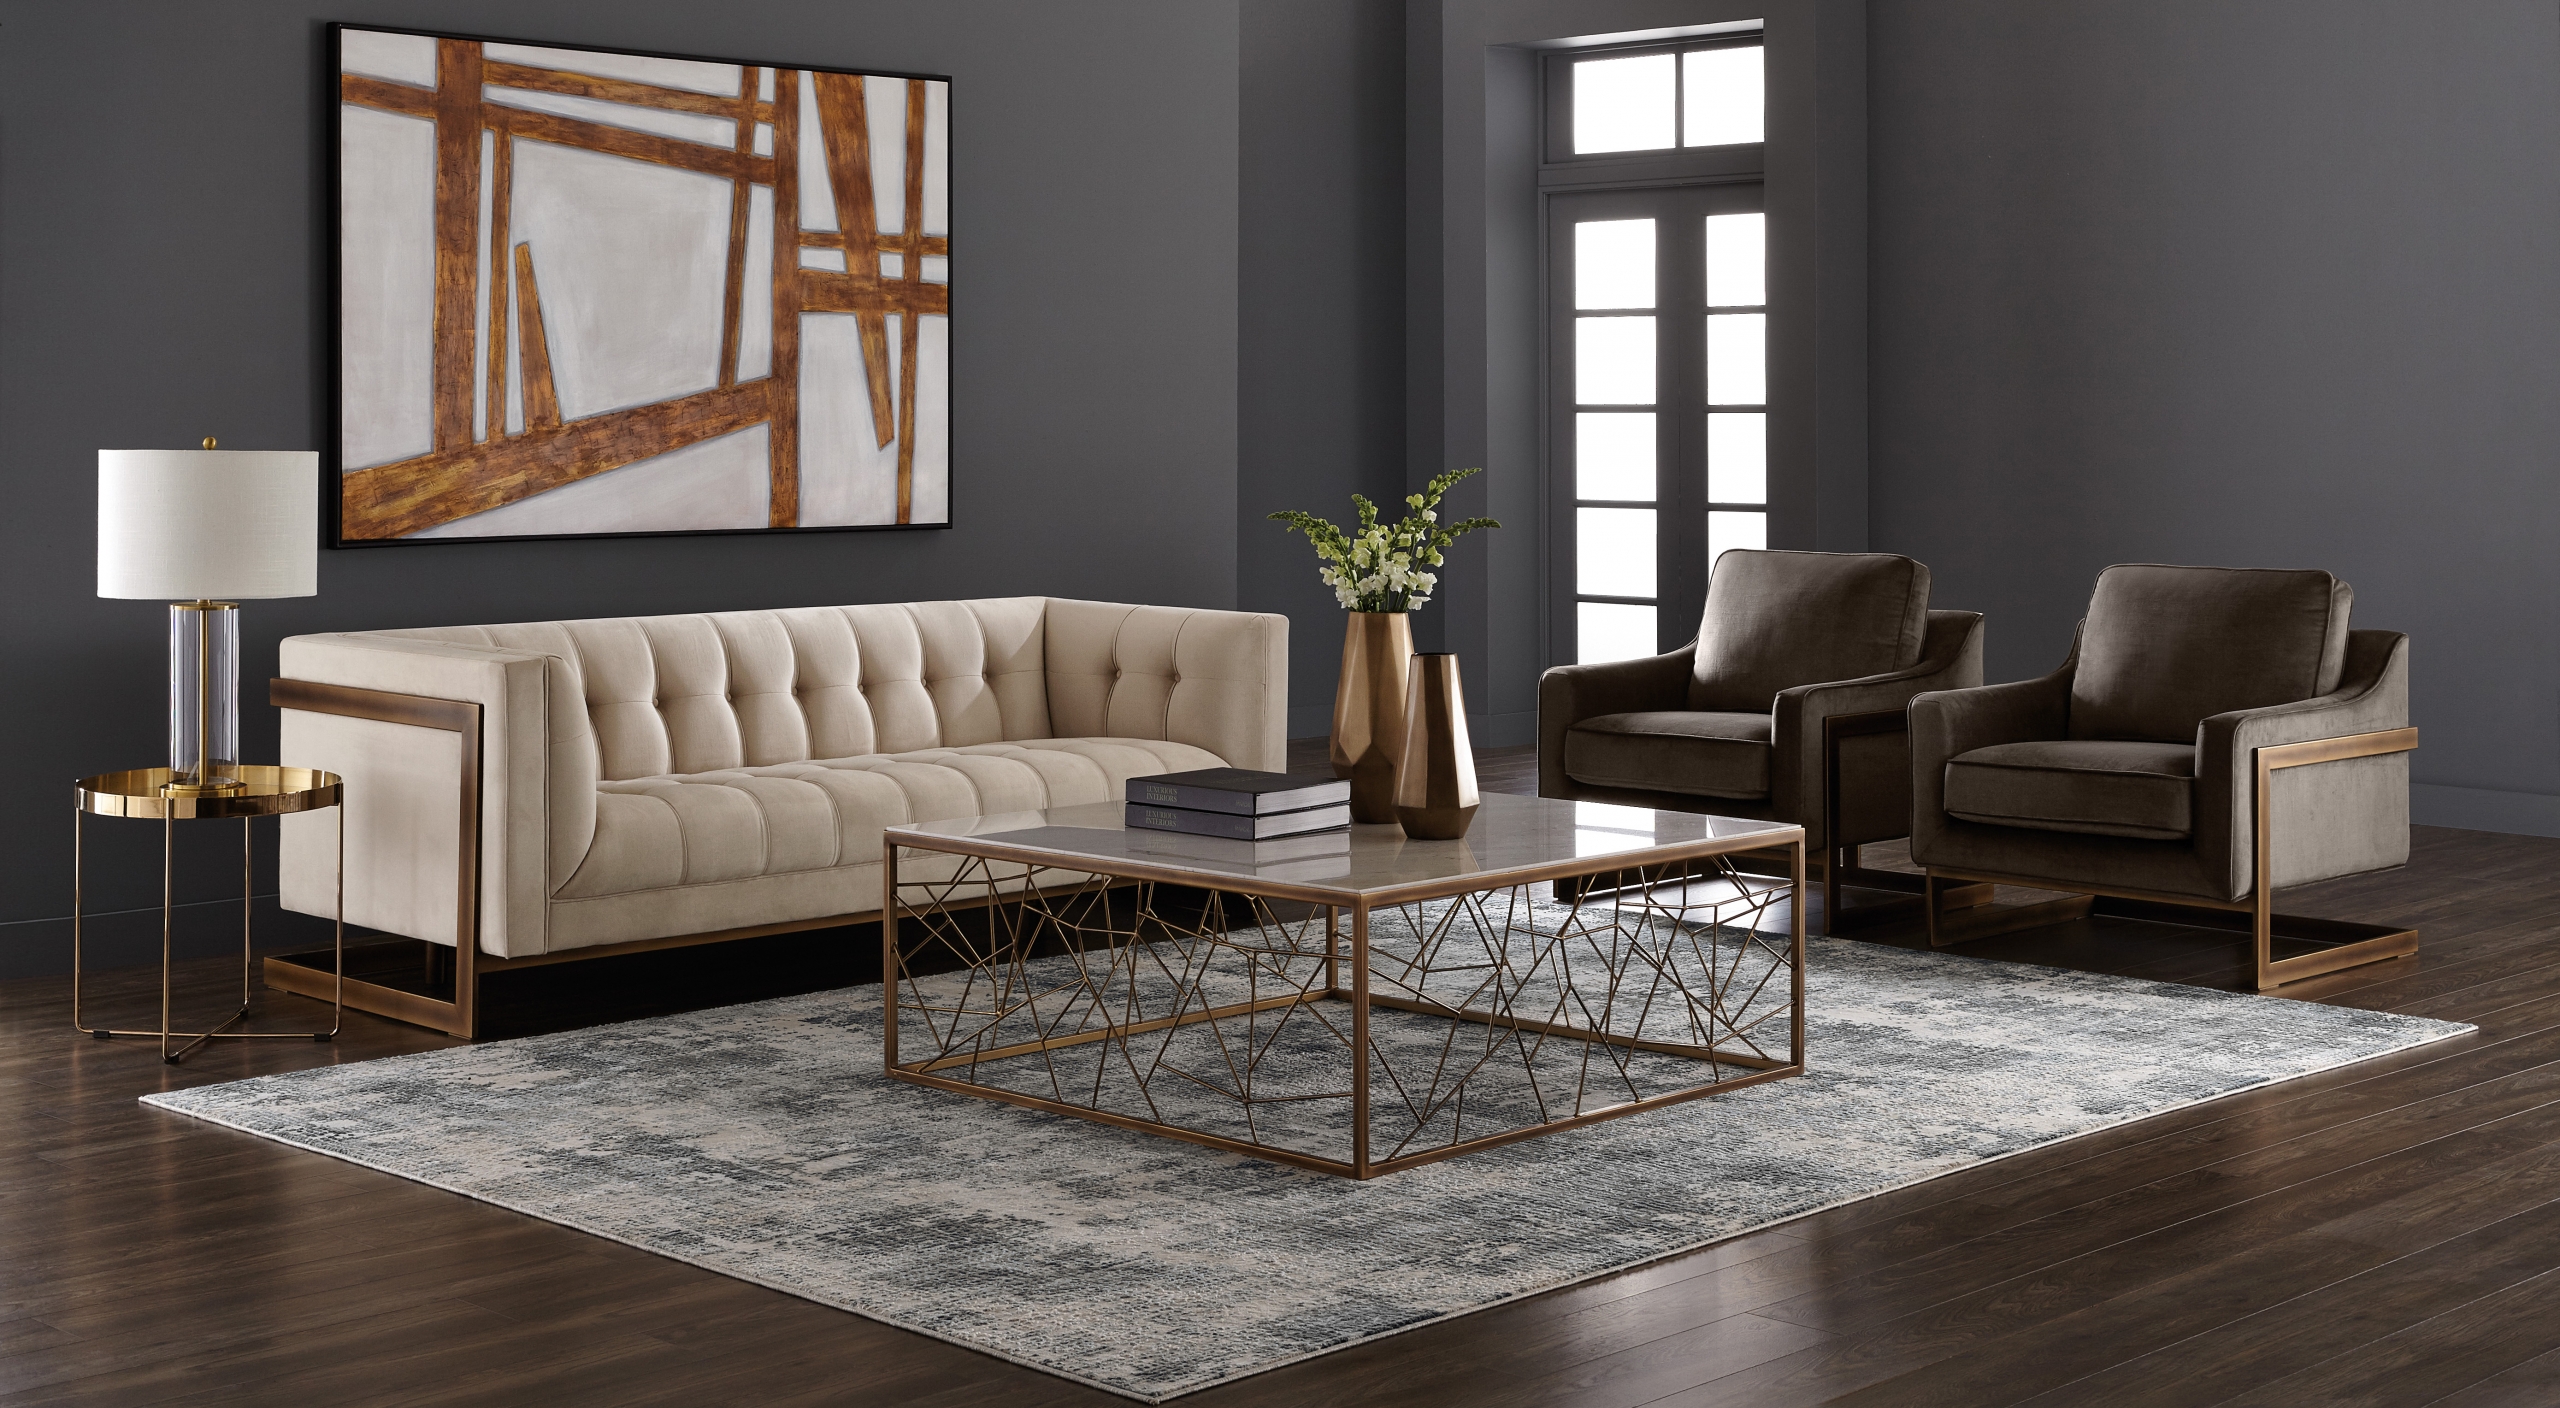 Donata Lifestyle living room setting displaying a variety of pieces